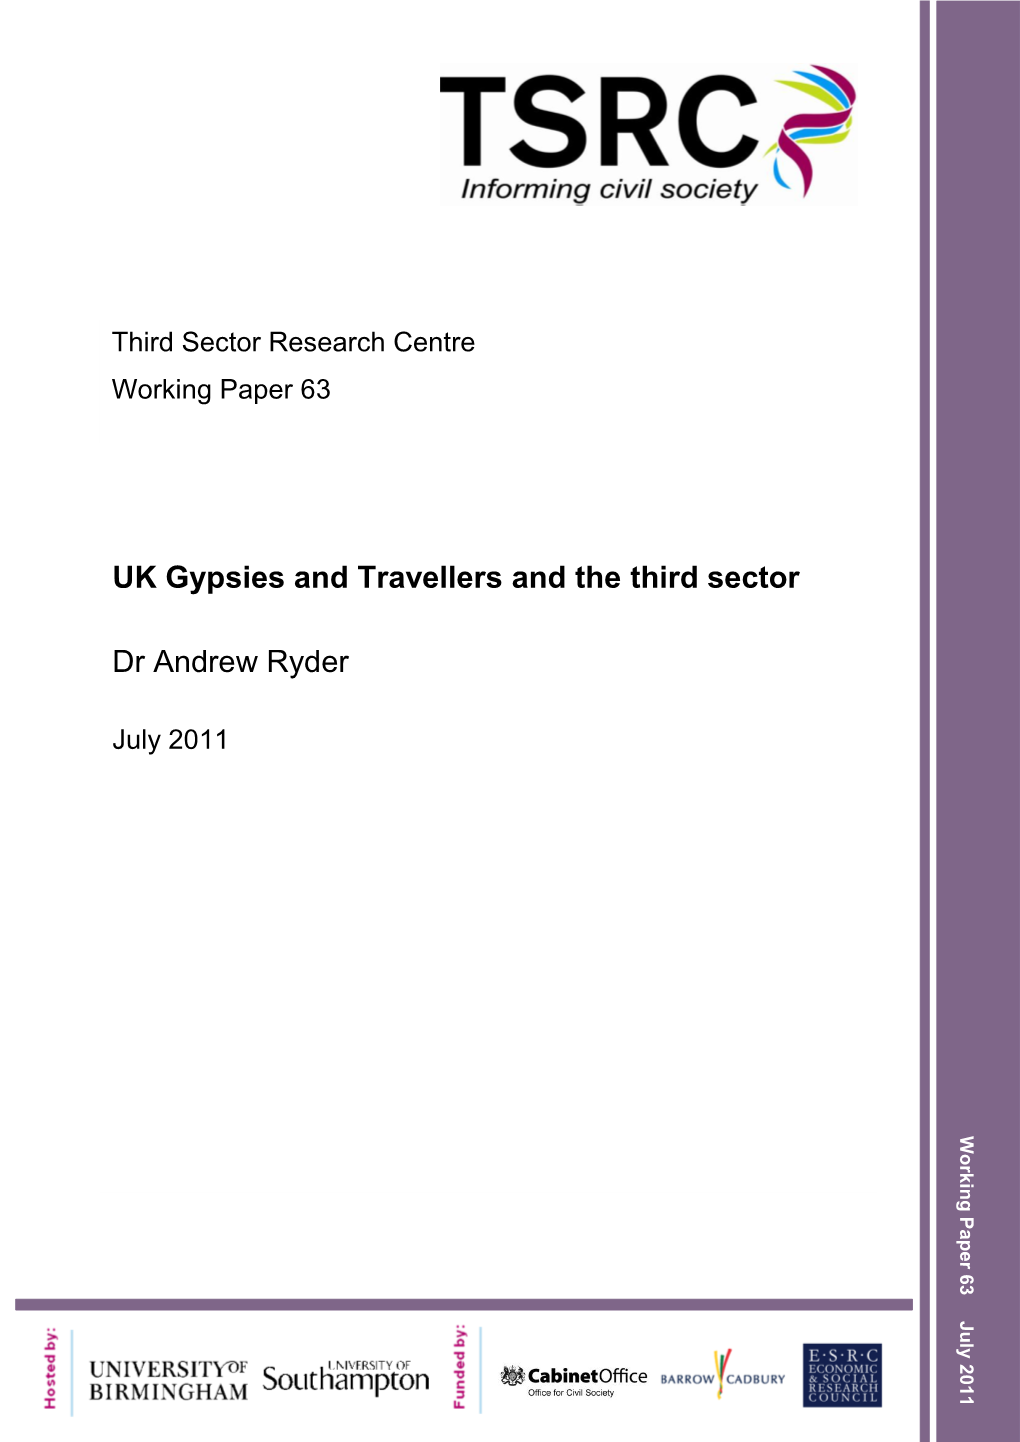 UK Gypsies and Travellers and the Third Sector Dr Andrew Ryder